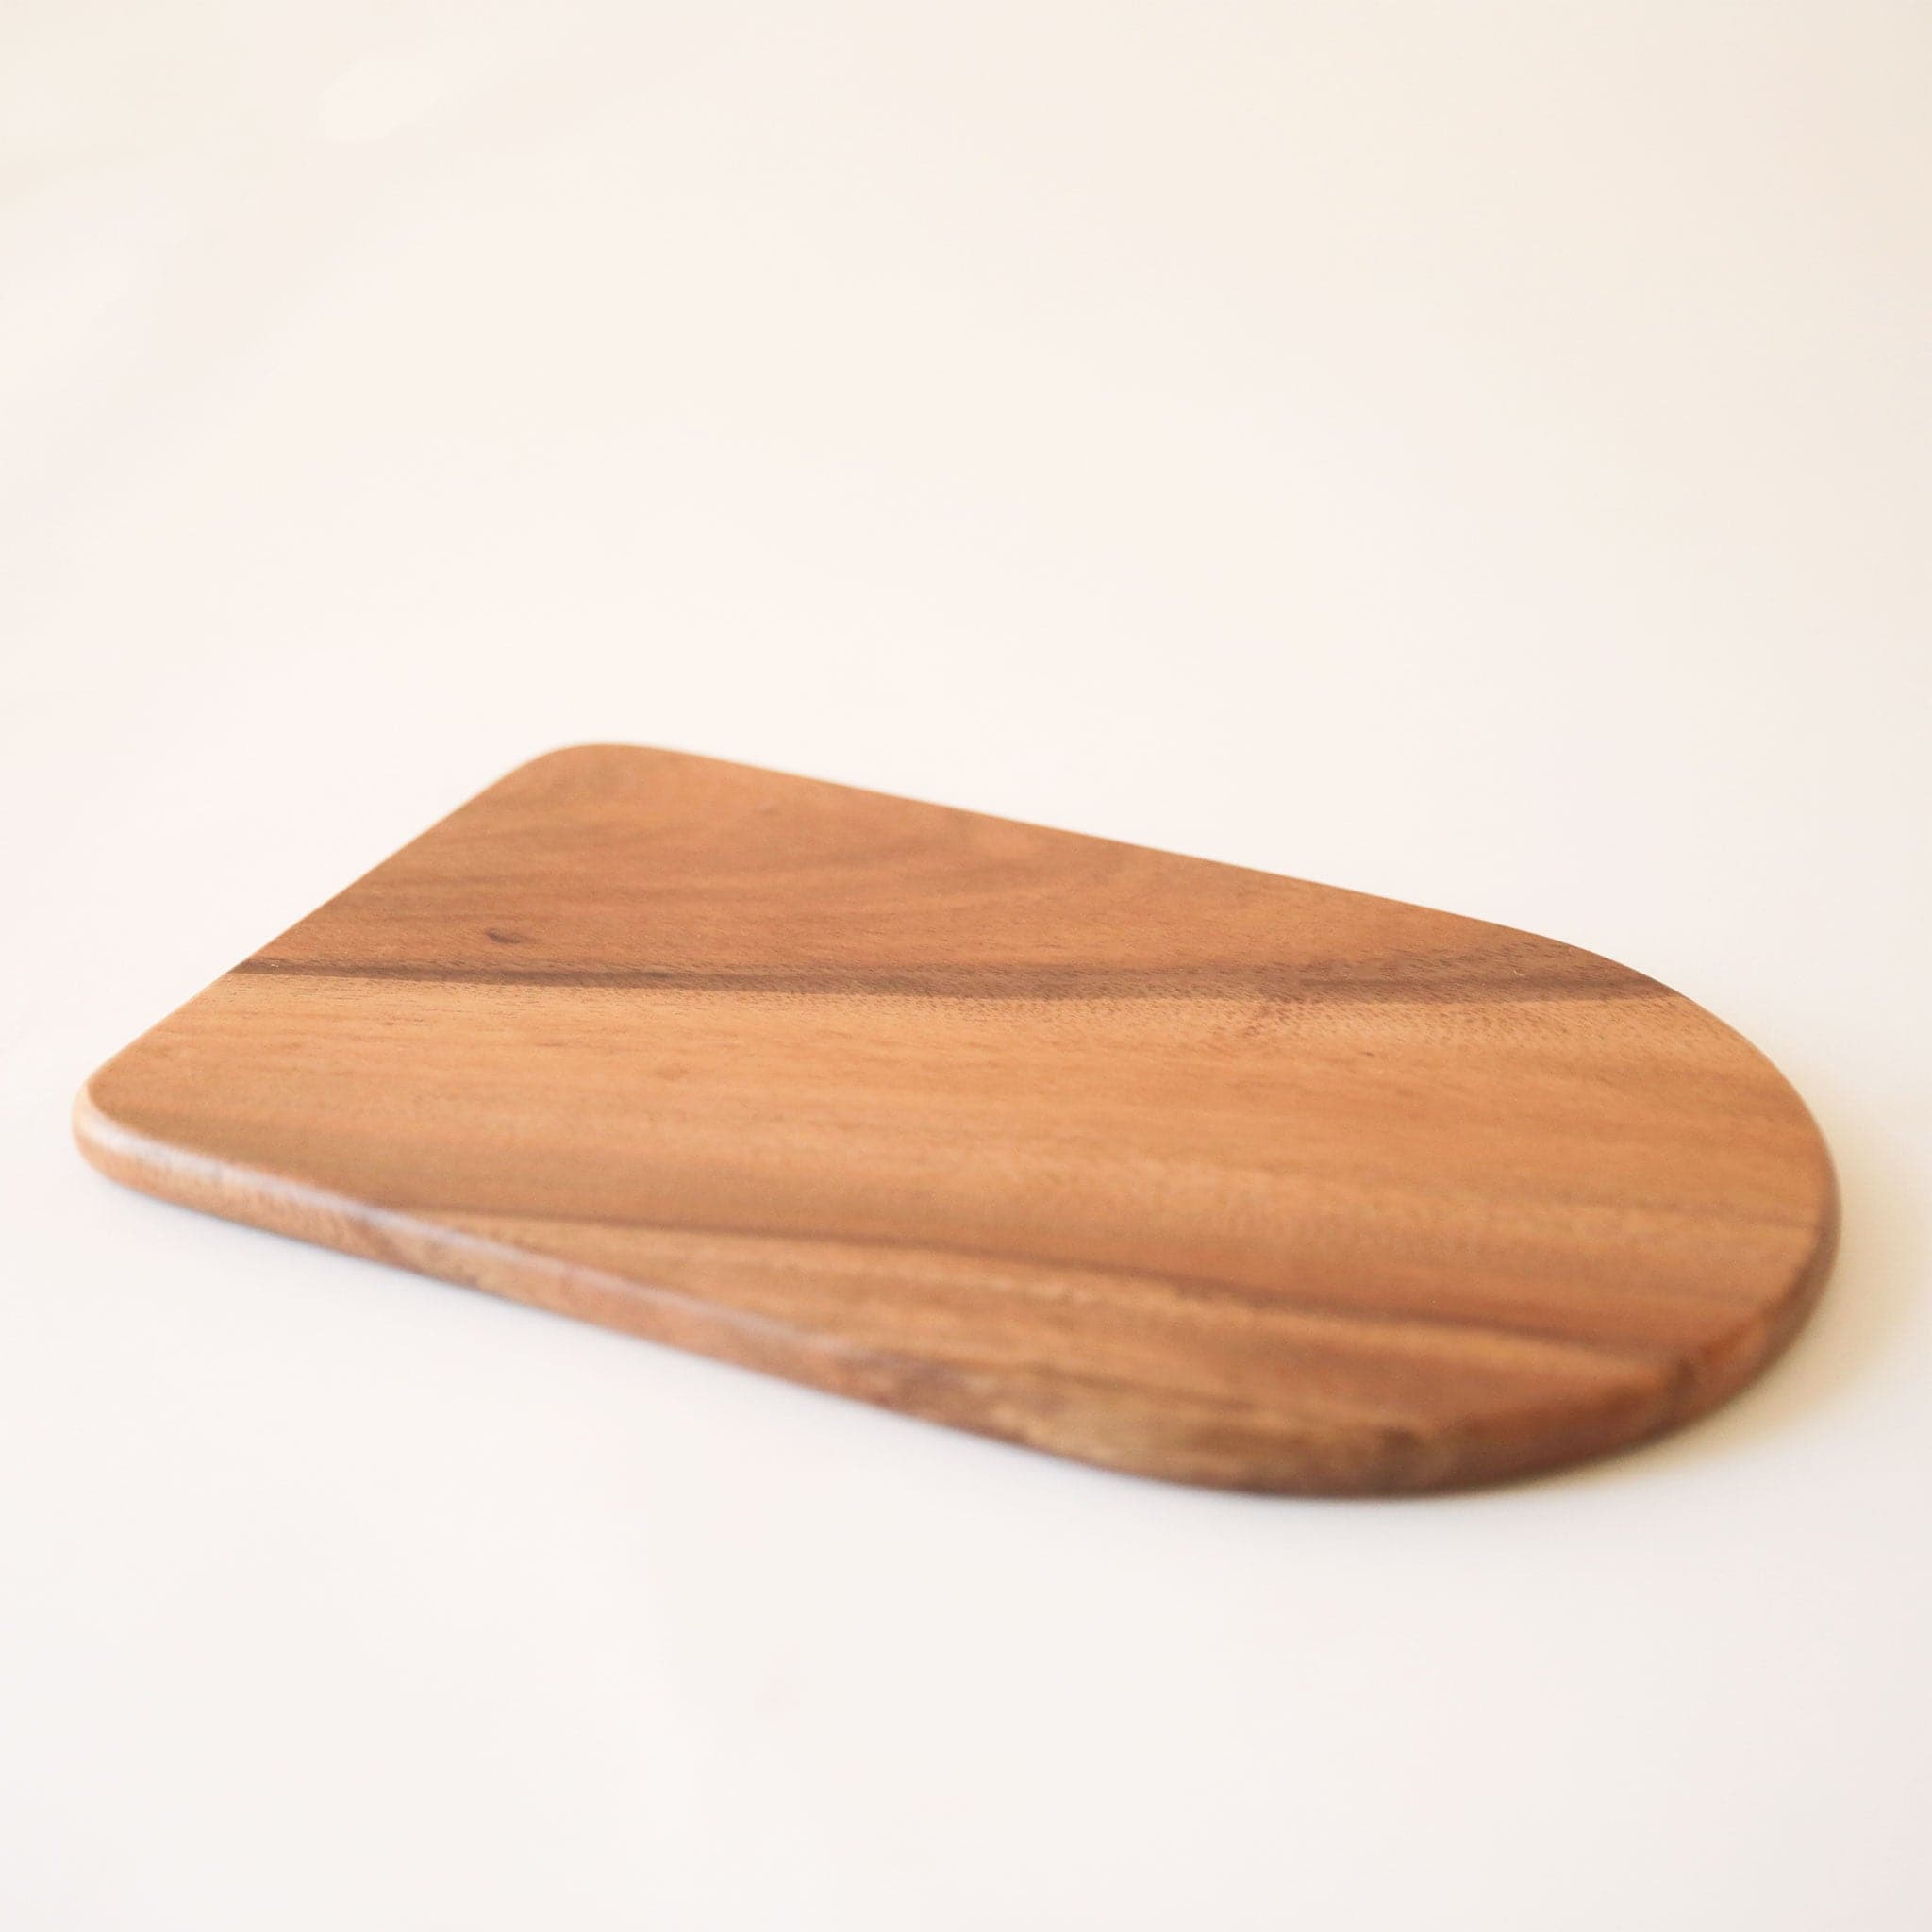 A wood cutting board with an arch on one side.